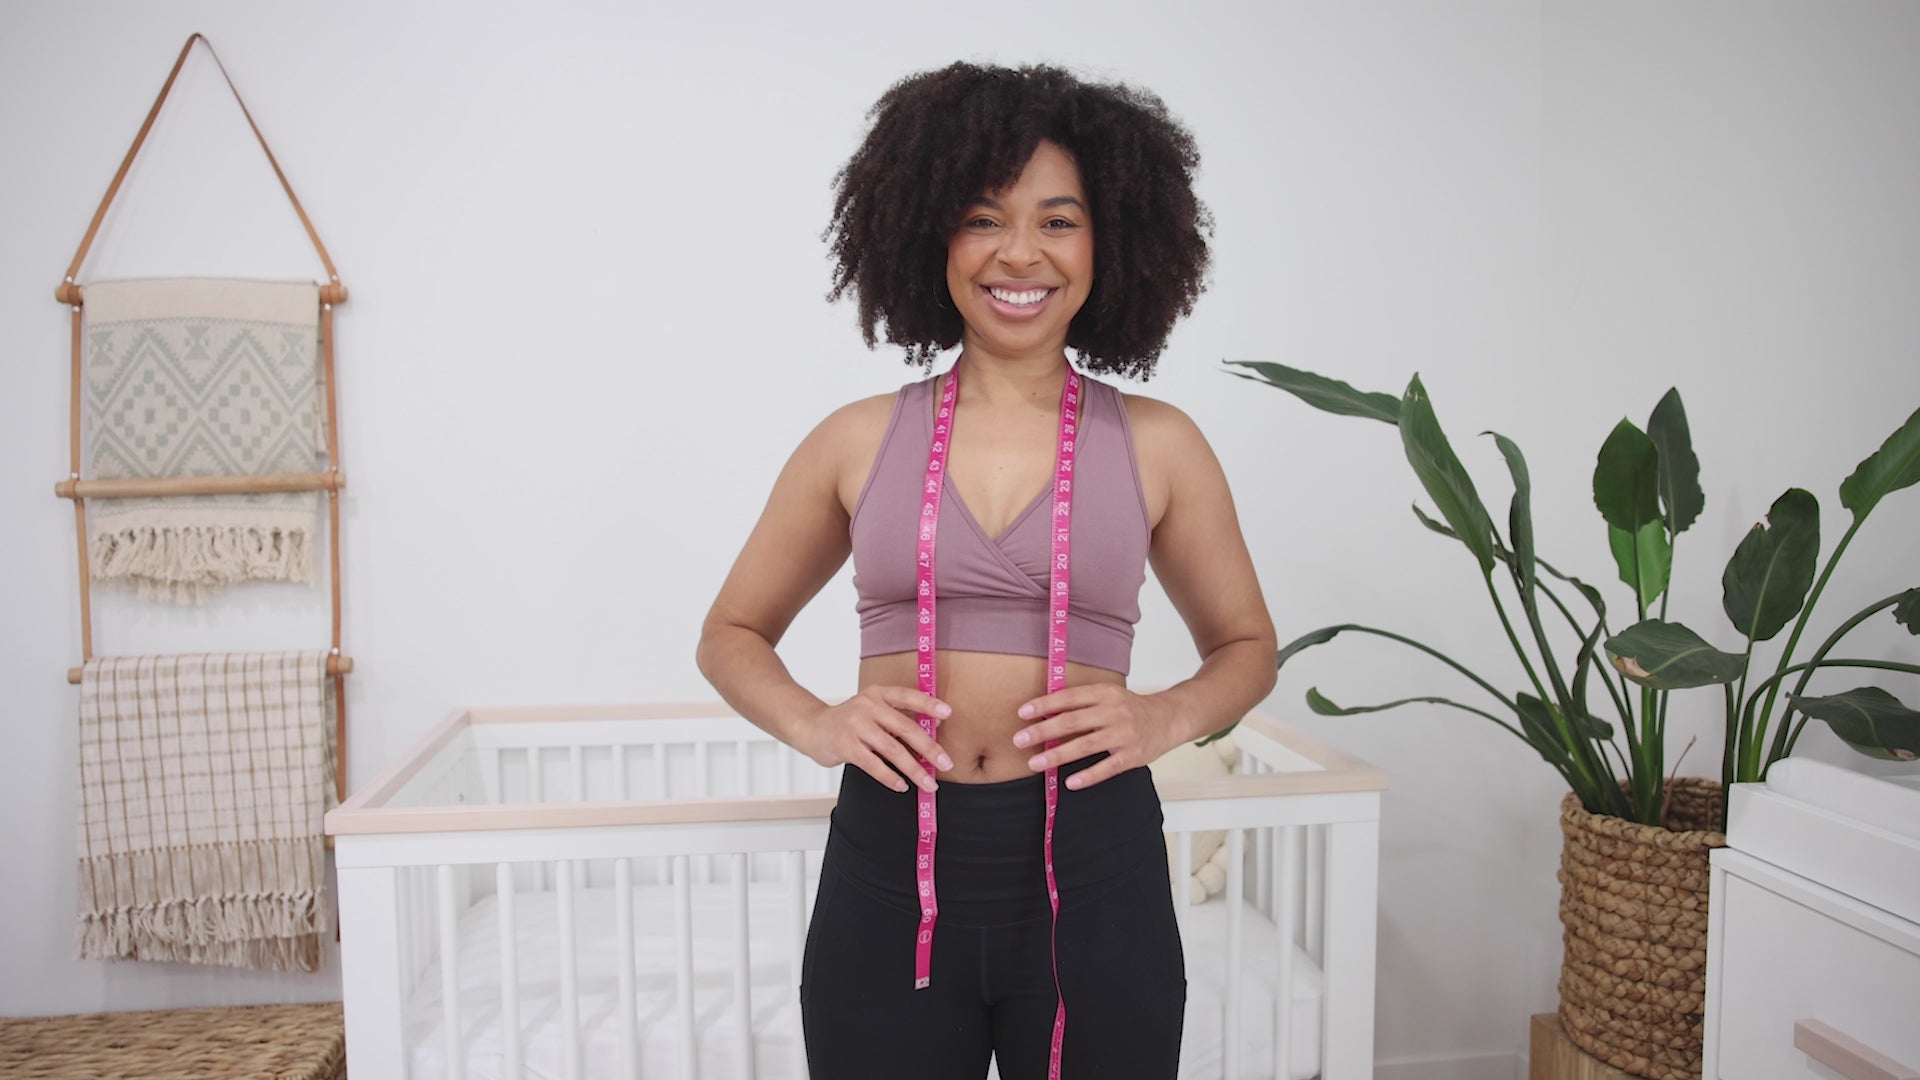 Load video: Video showcasing how to measure to find your perfect bra fit